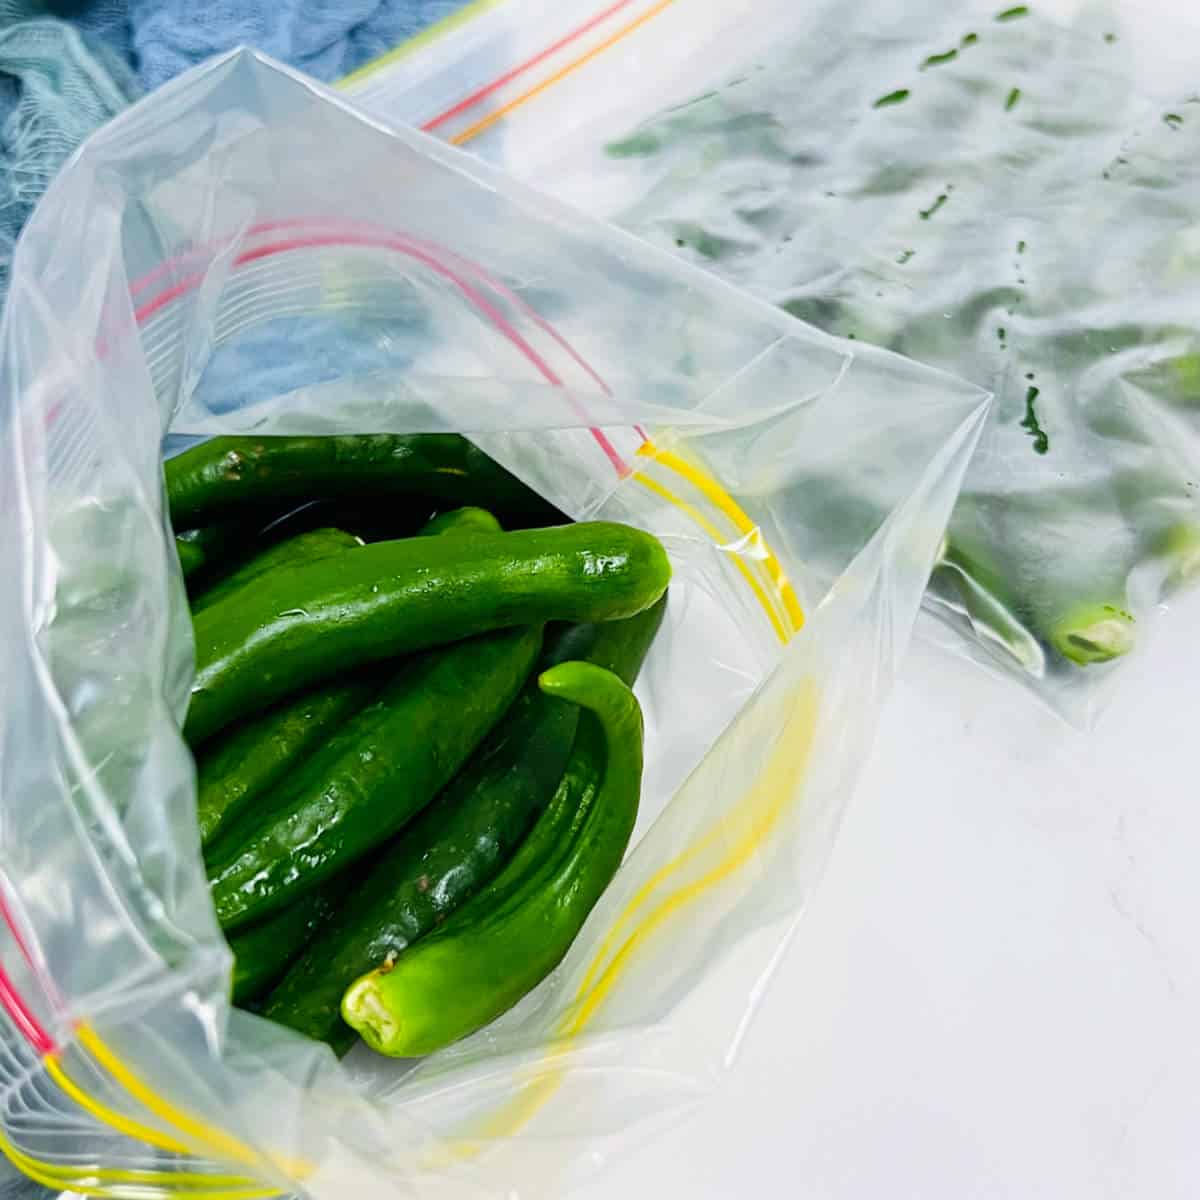 How to store green chili peppers in a ziplock bag.